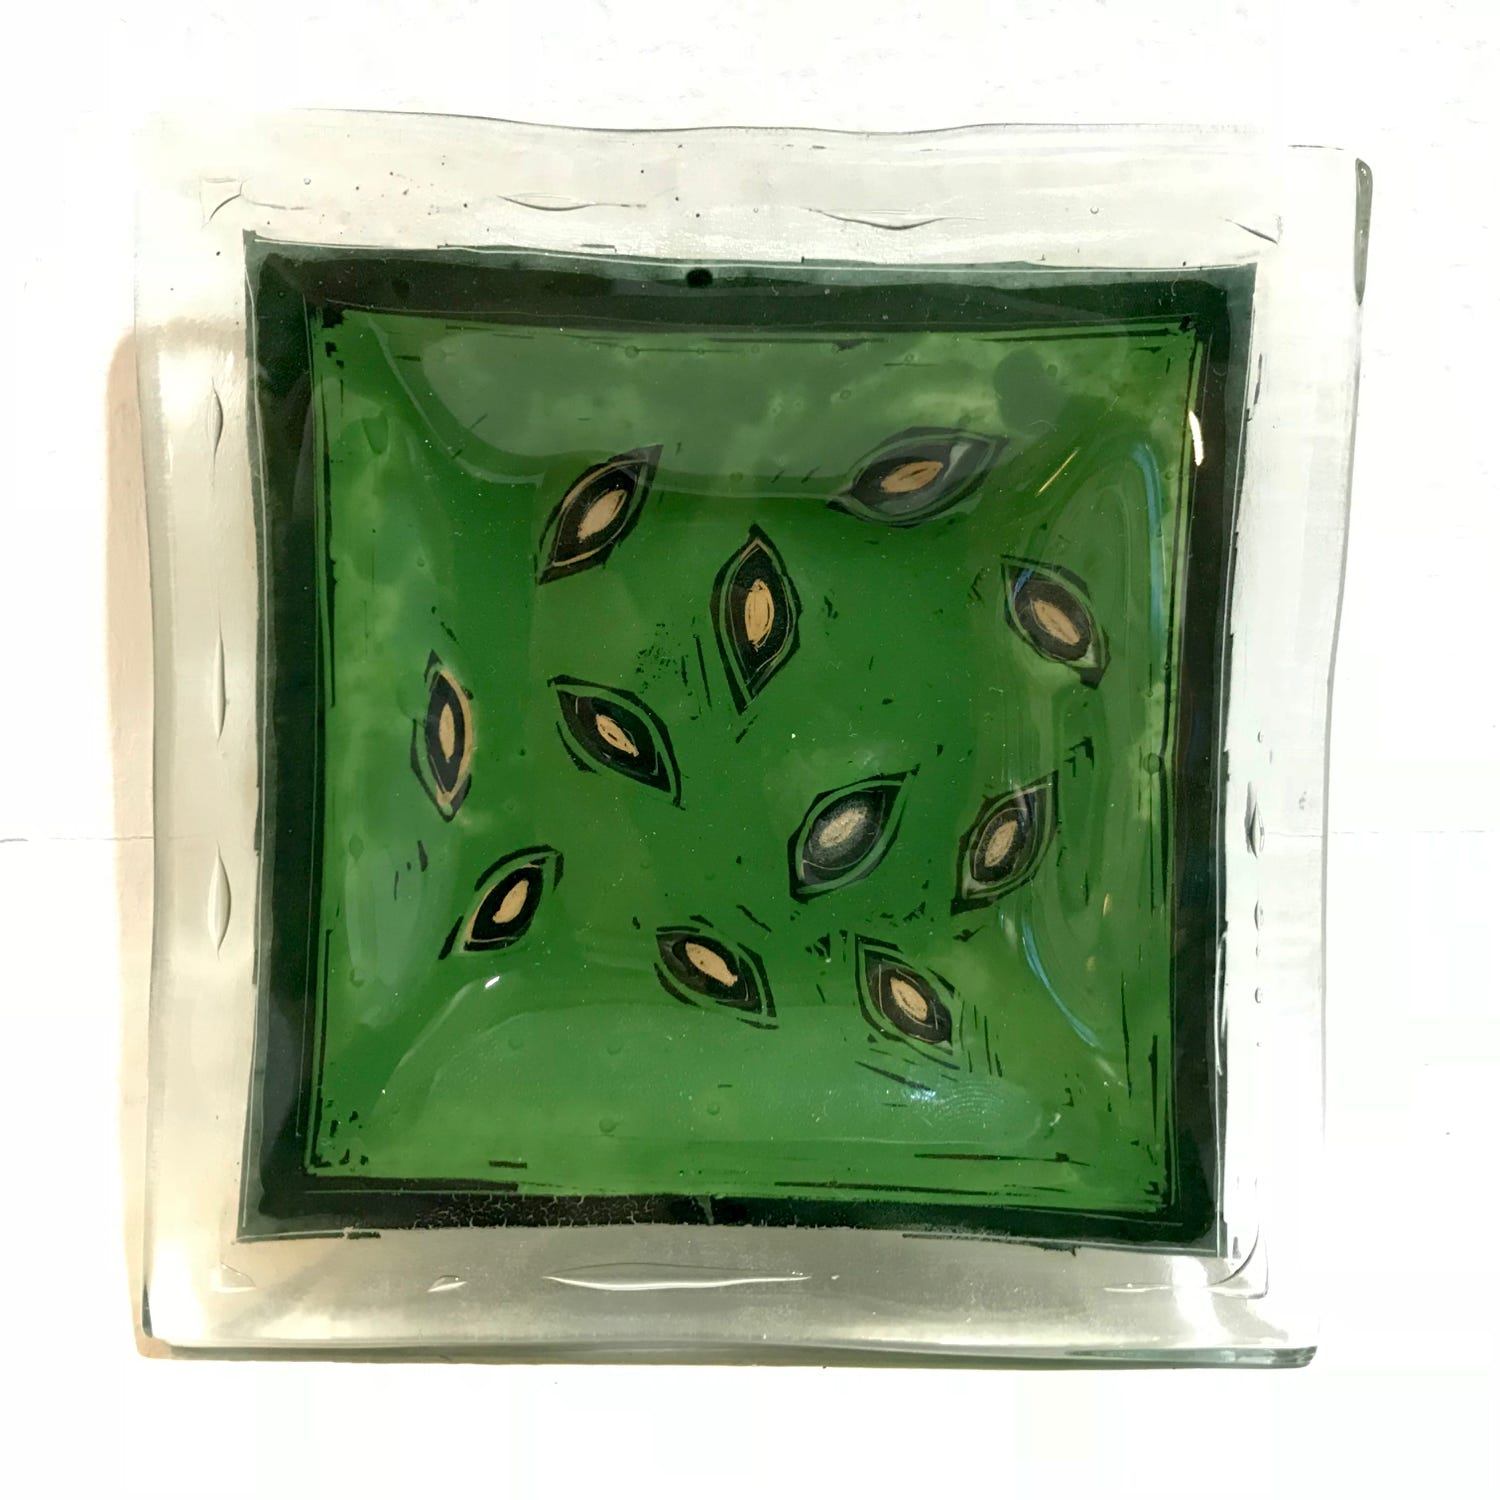 Clare Adams Composture Series #3 2015 - 2018 Reversed Glass Painting 14 x 11 in